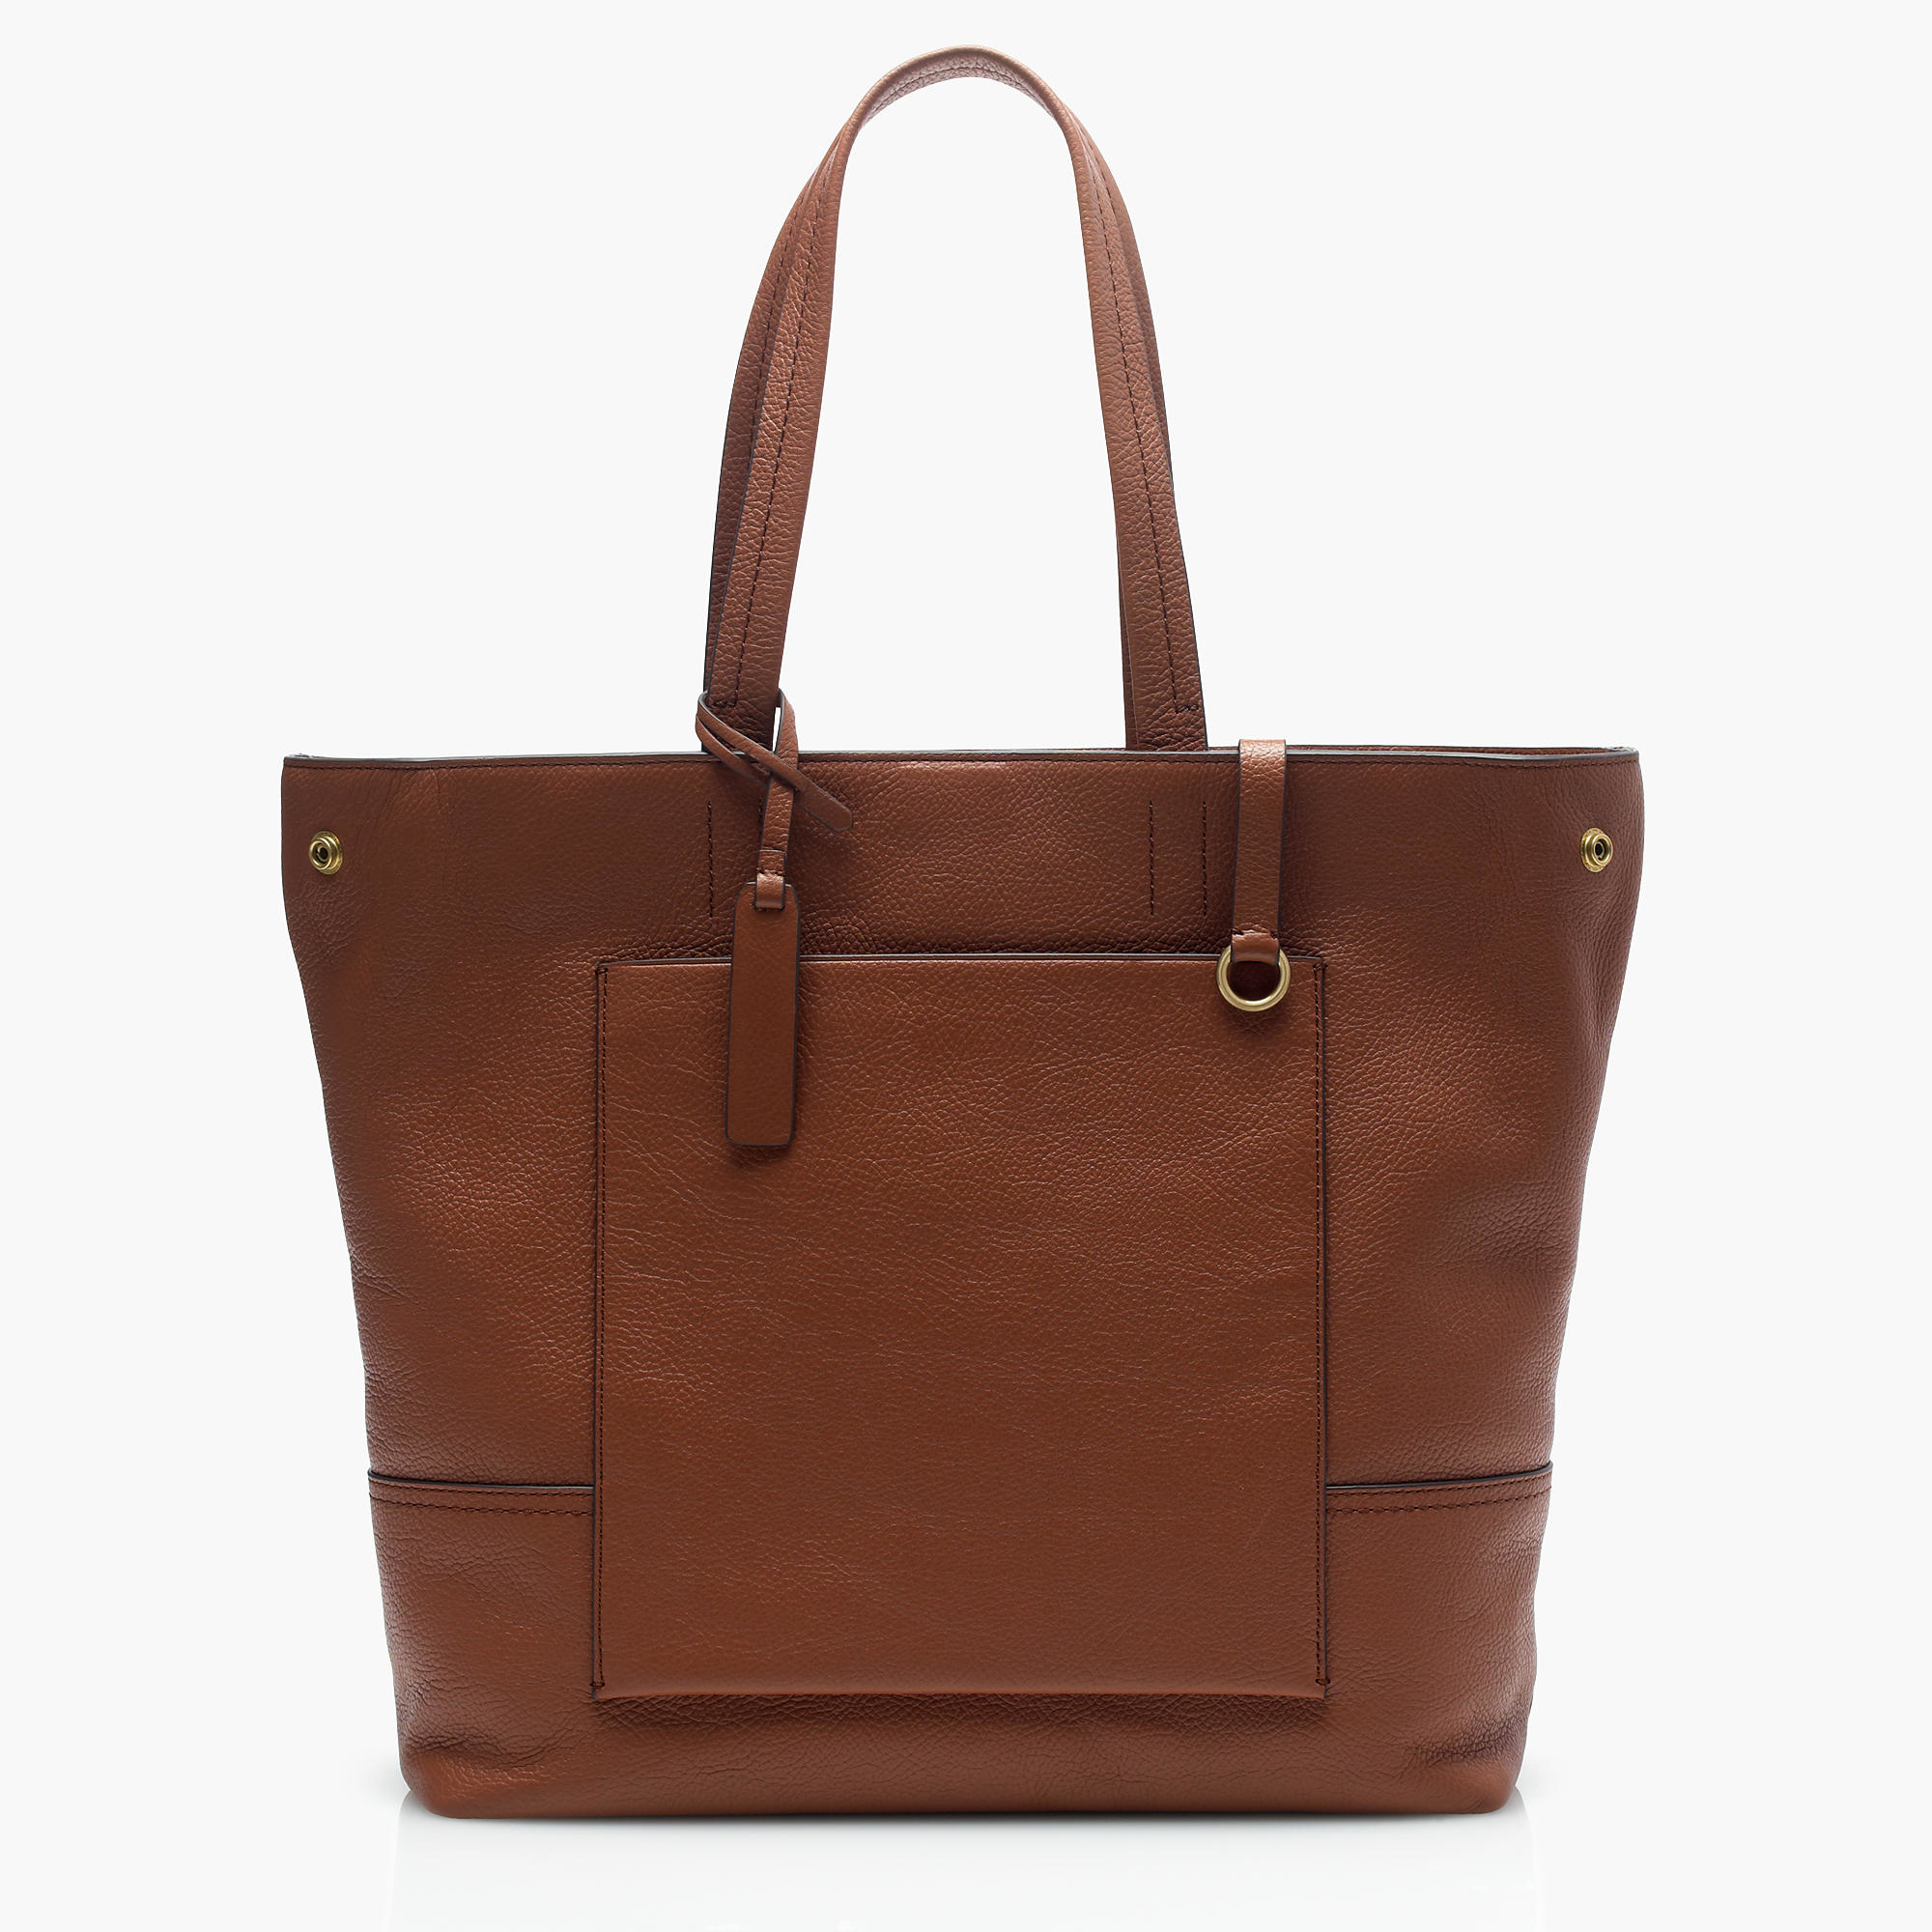 J.crew All-day Tote in Multicolor (roasted chestnut) | Lyst